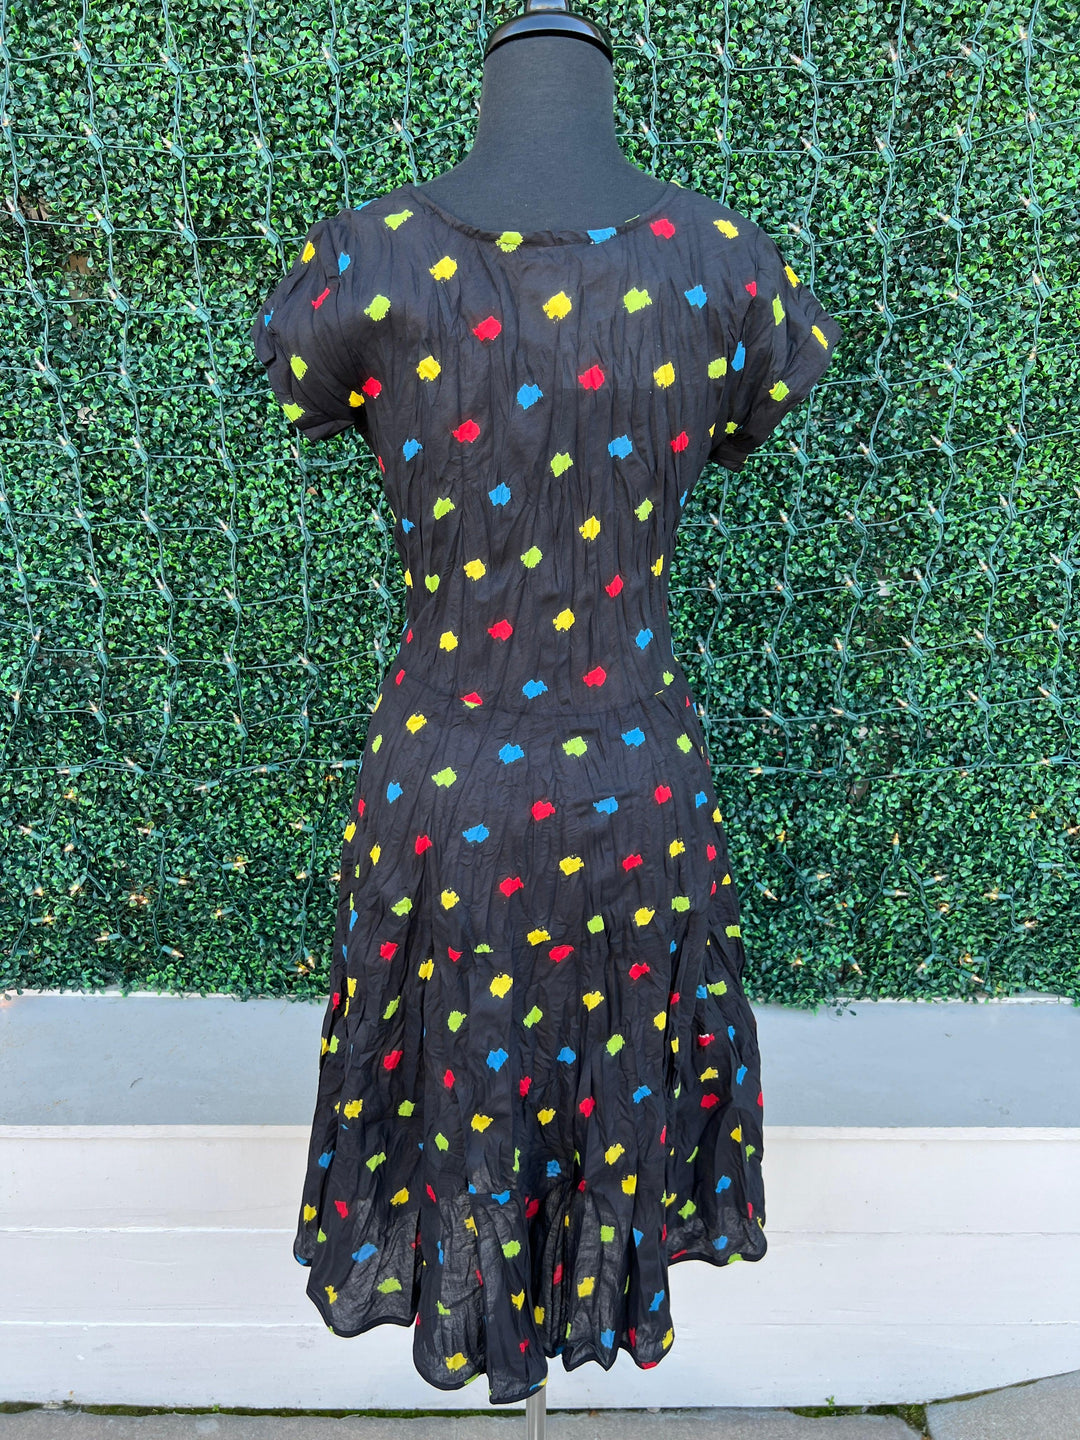 JALAN midi dress by dress addict with red blue yellow and green dot background and front pockets 100% cotton